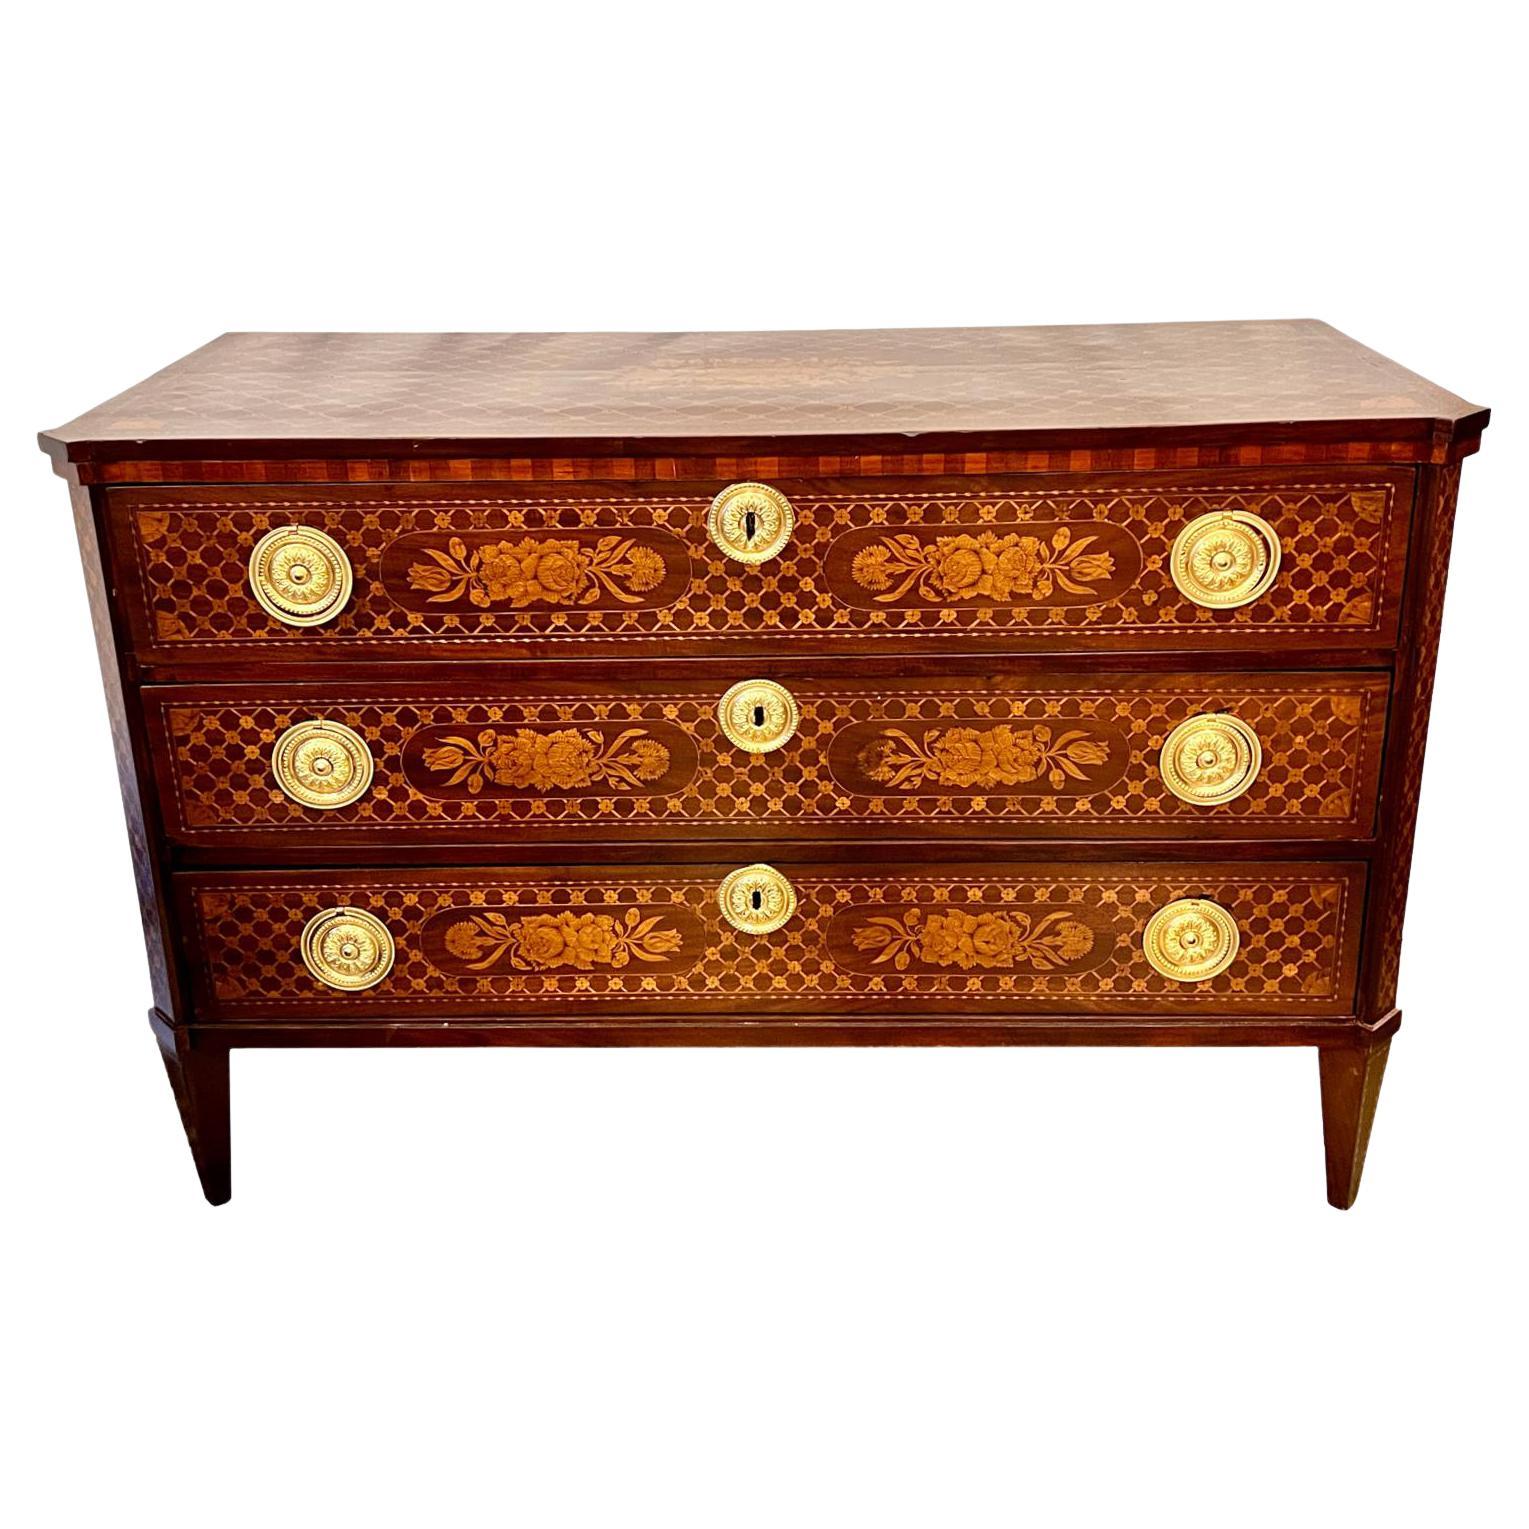 French Antique Marquetry Chest of Drawers